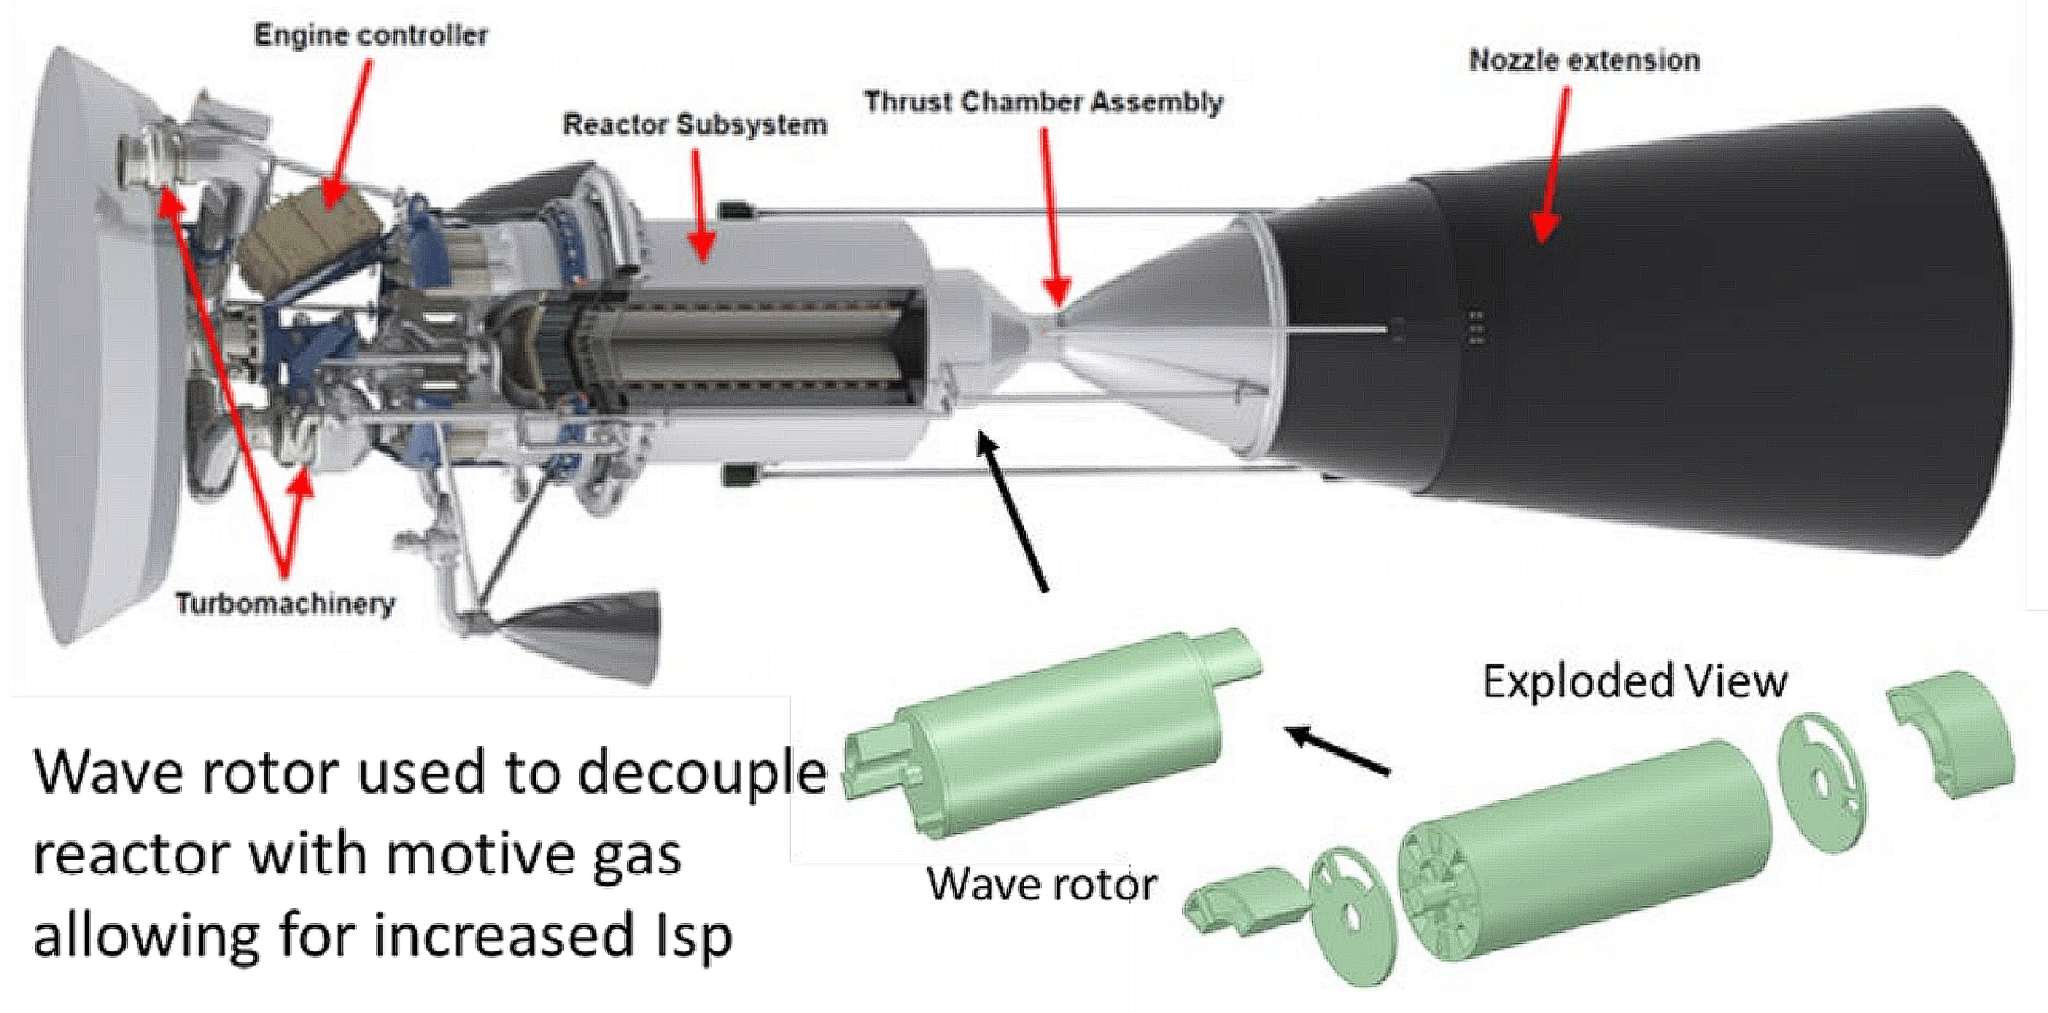 Diagram of wave rotor used to decouple reactor with motive gas allowing for increased Isp.